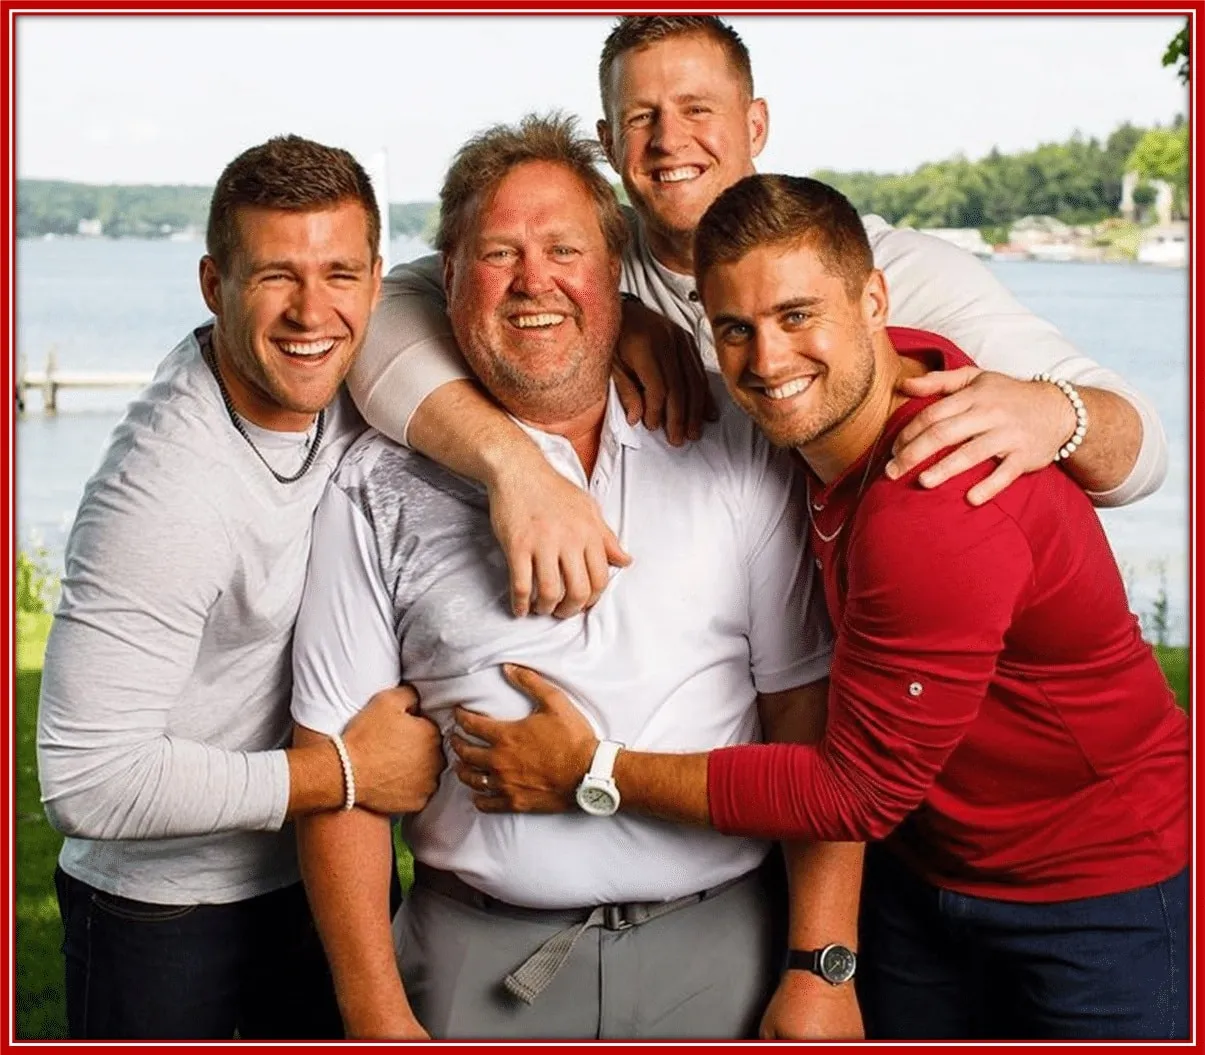 A happy photo of The Watt brothers and their dad.